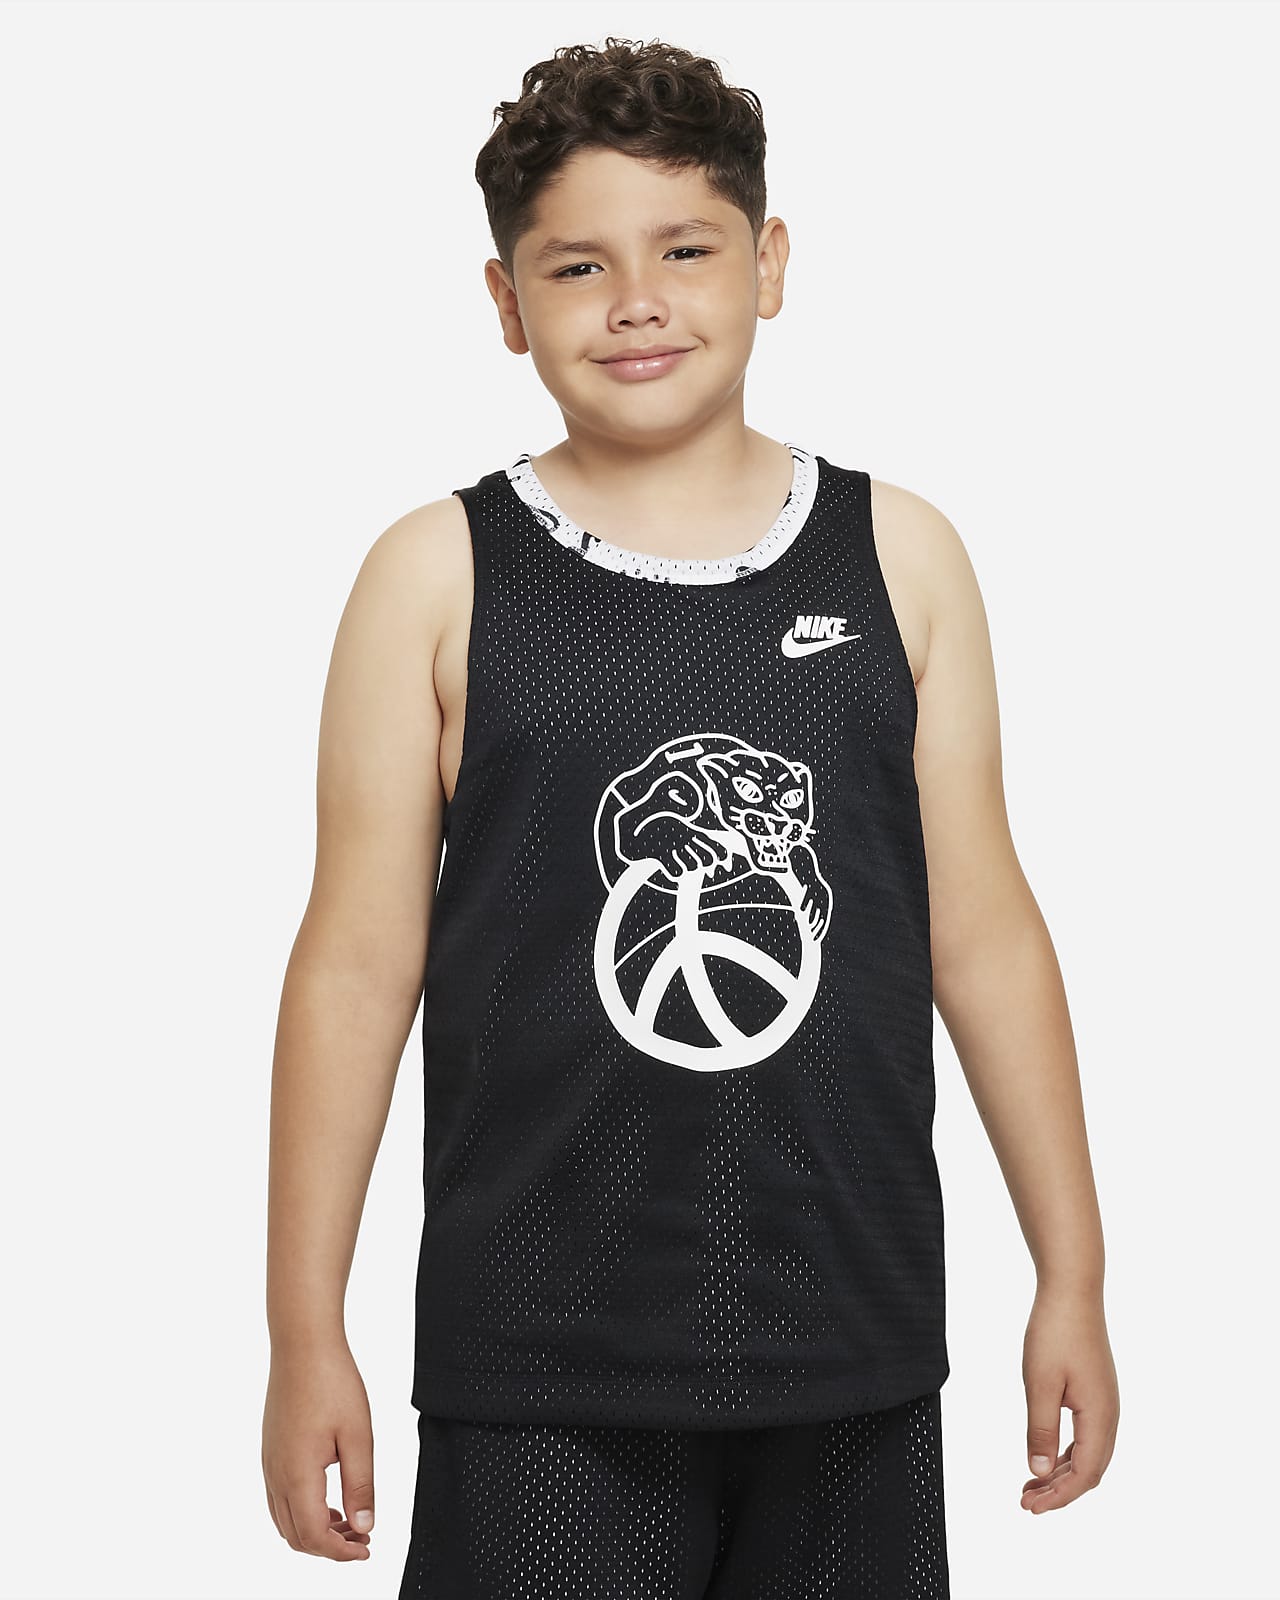 Nike Culture of Basketball Big Kids' (Boys') Reversible Basketball Jersey (Extended Size)